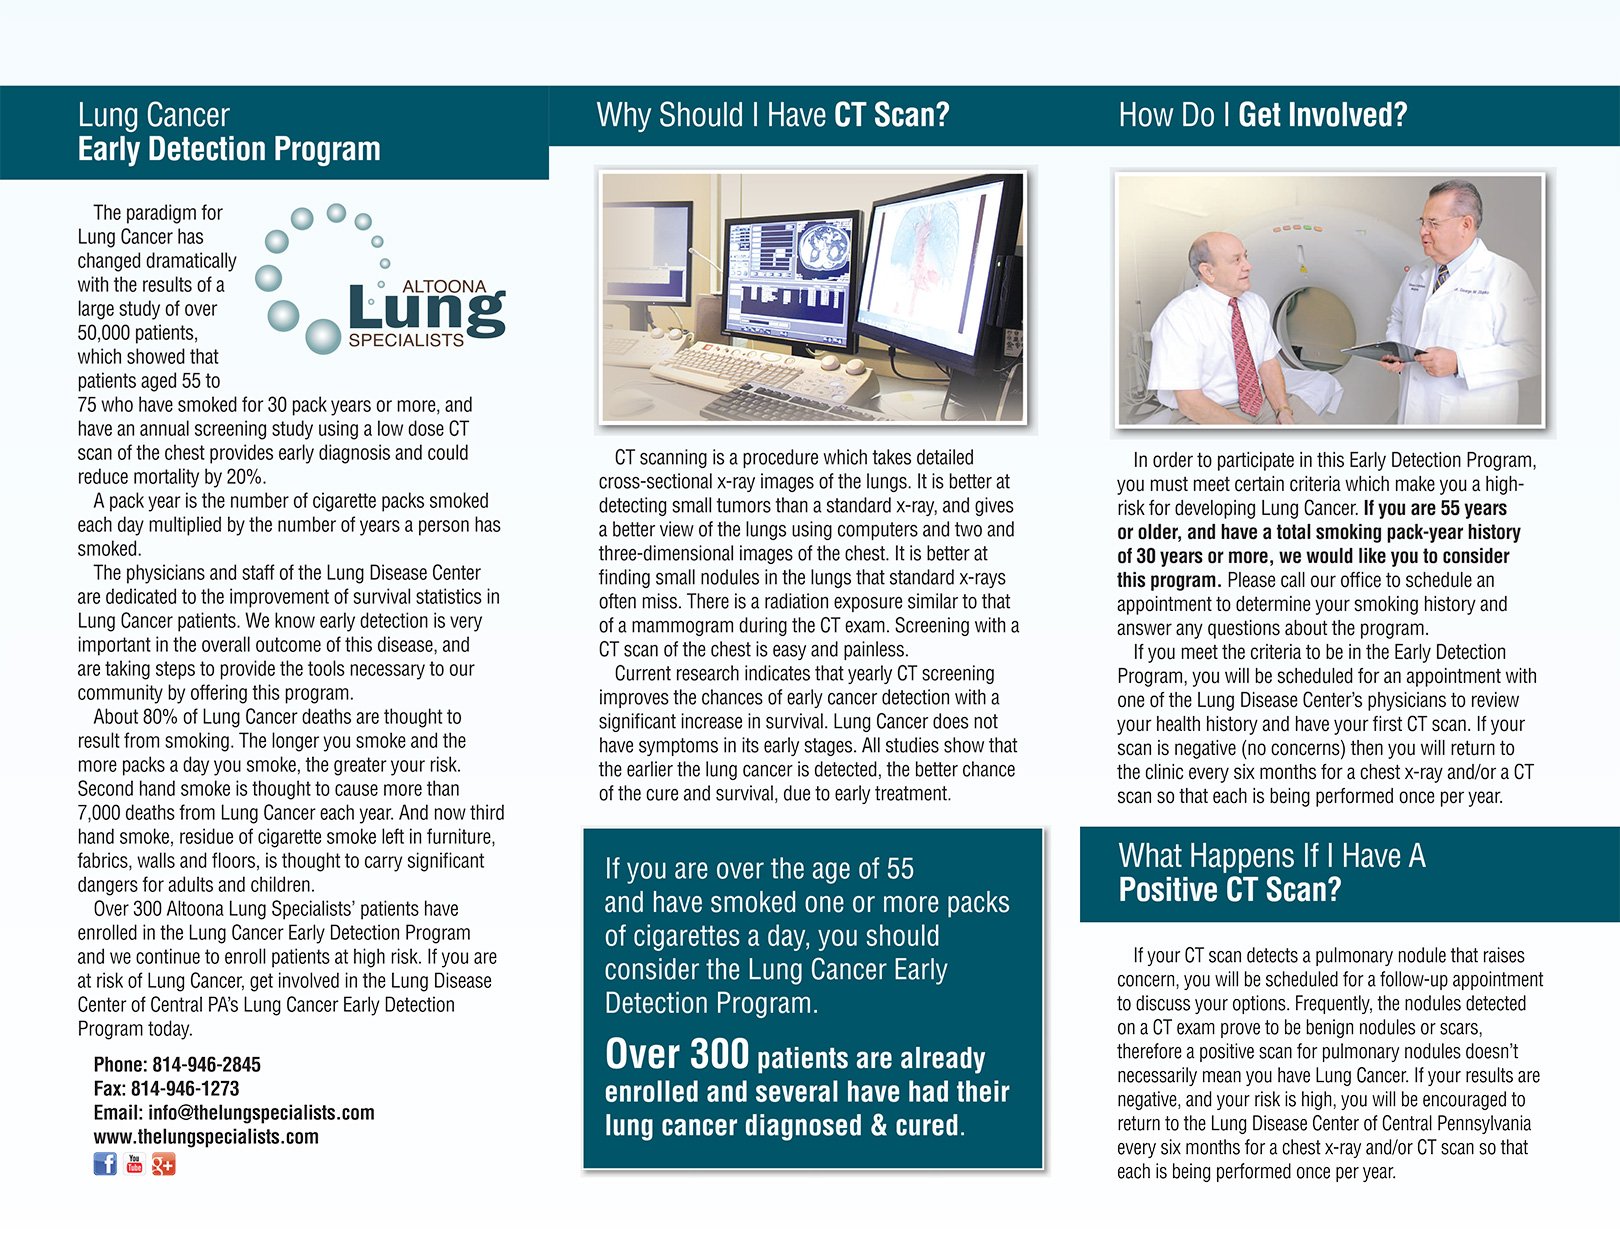 LUNG CANCER EARLY DETECTION PROGRAM 2